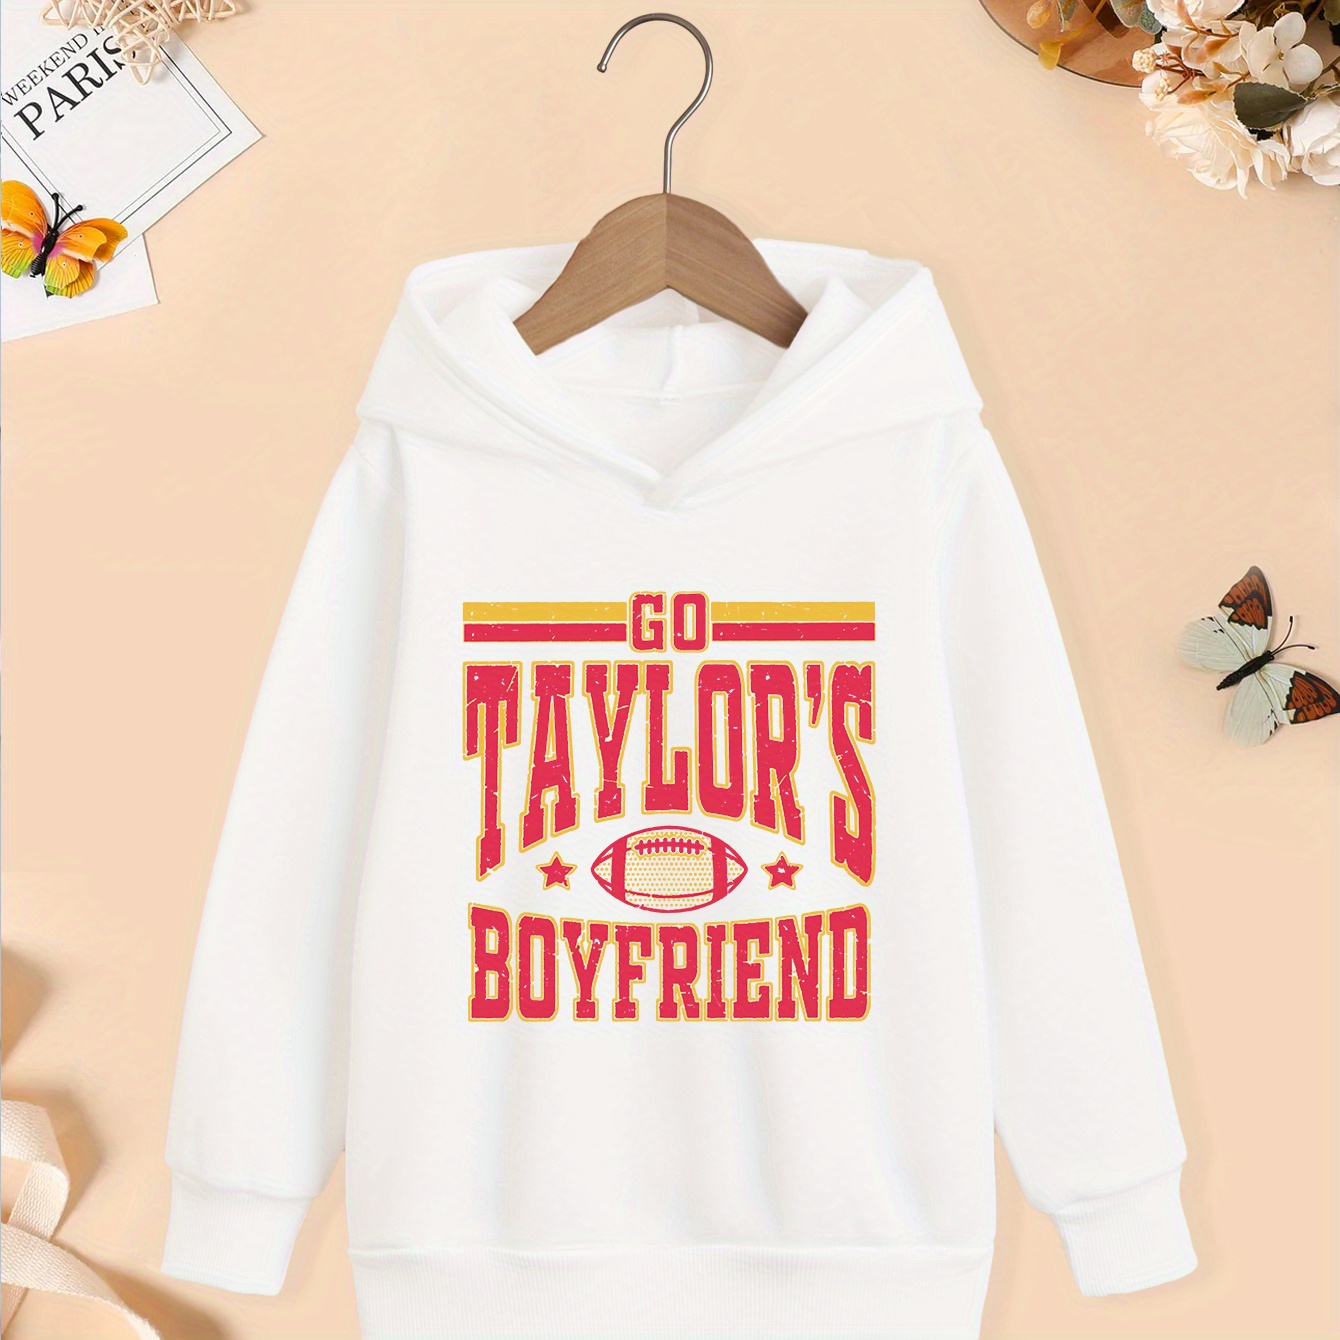 

Go Boyfriend Rugby Football Design Print, Girl's Fashion Cozy Hoodies, Casual Long Sleeve Pullover Hoodies For Autumn And Winter